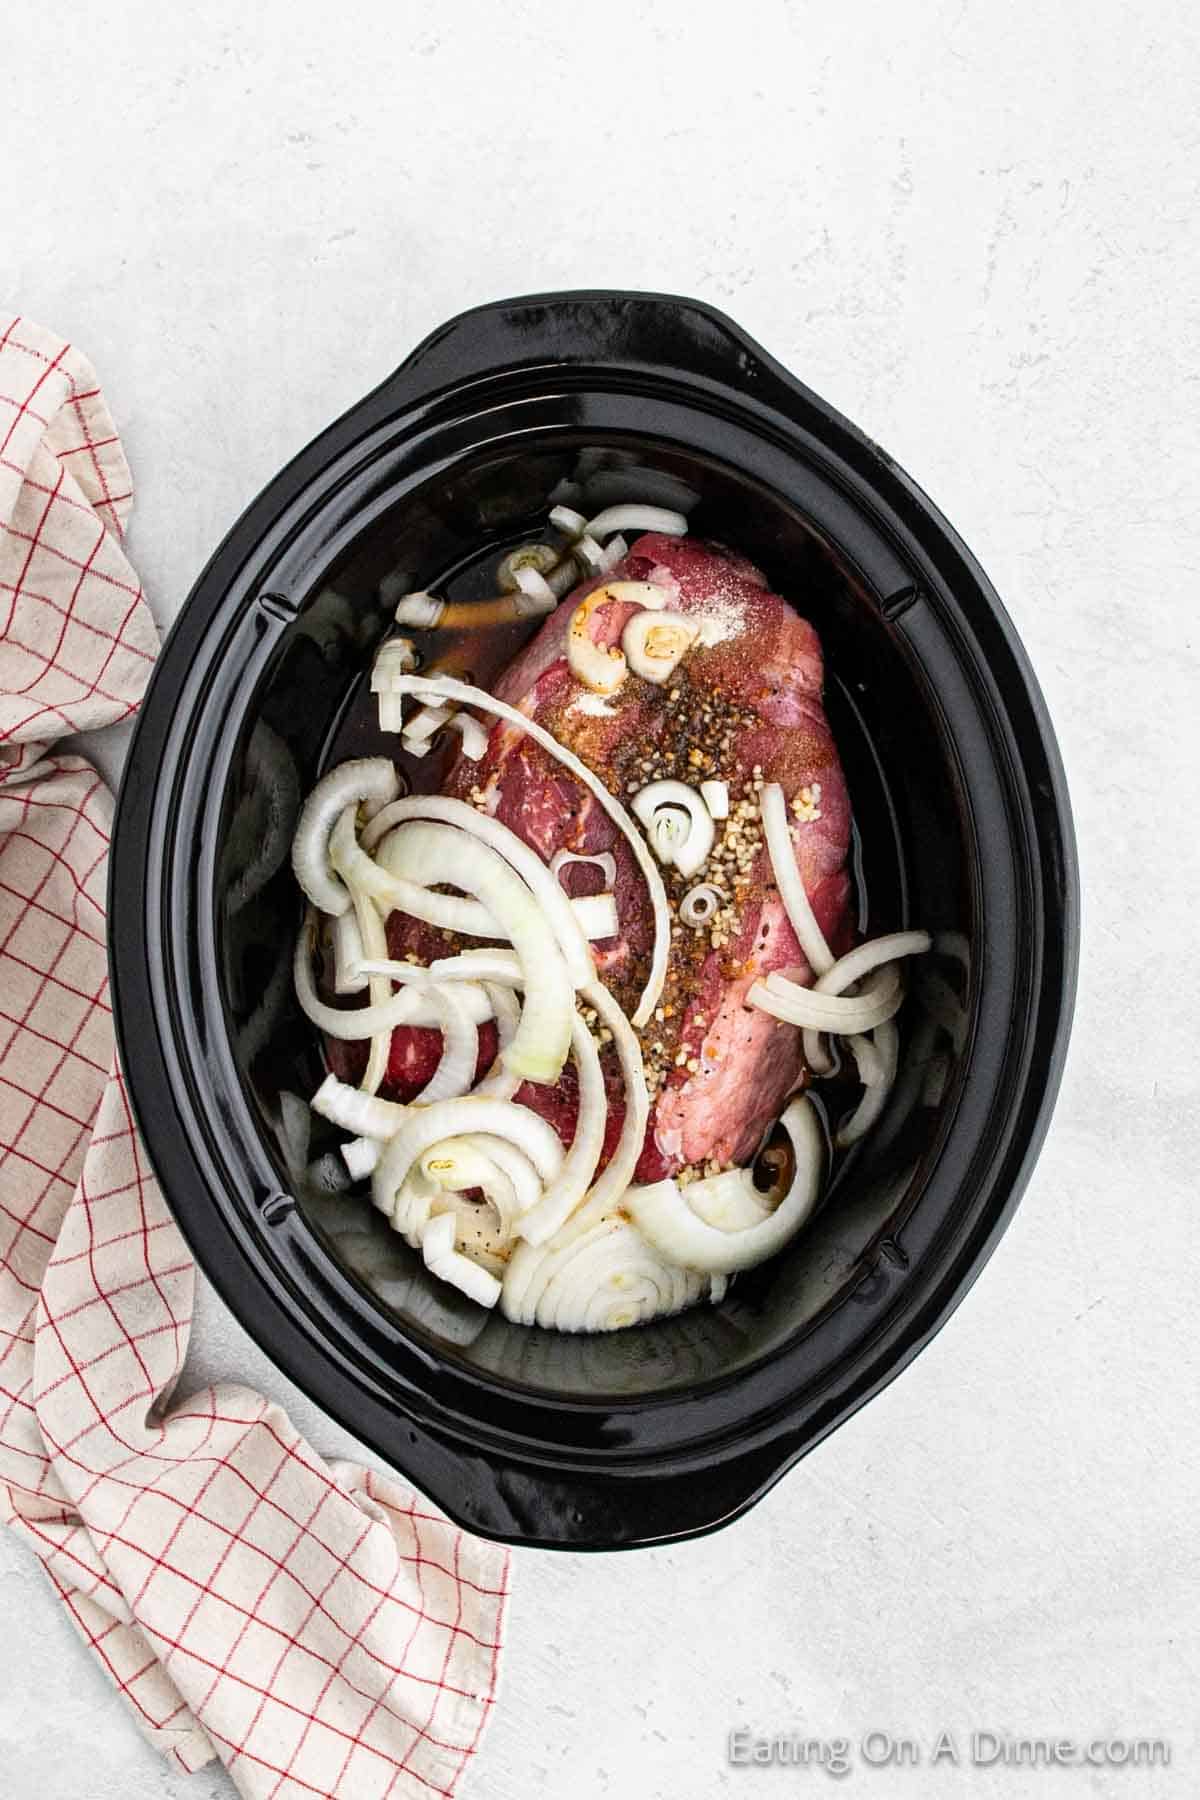 Adding the beef, onions and sauce to the slow cooker